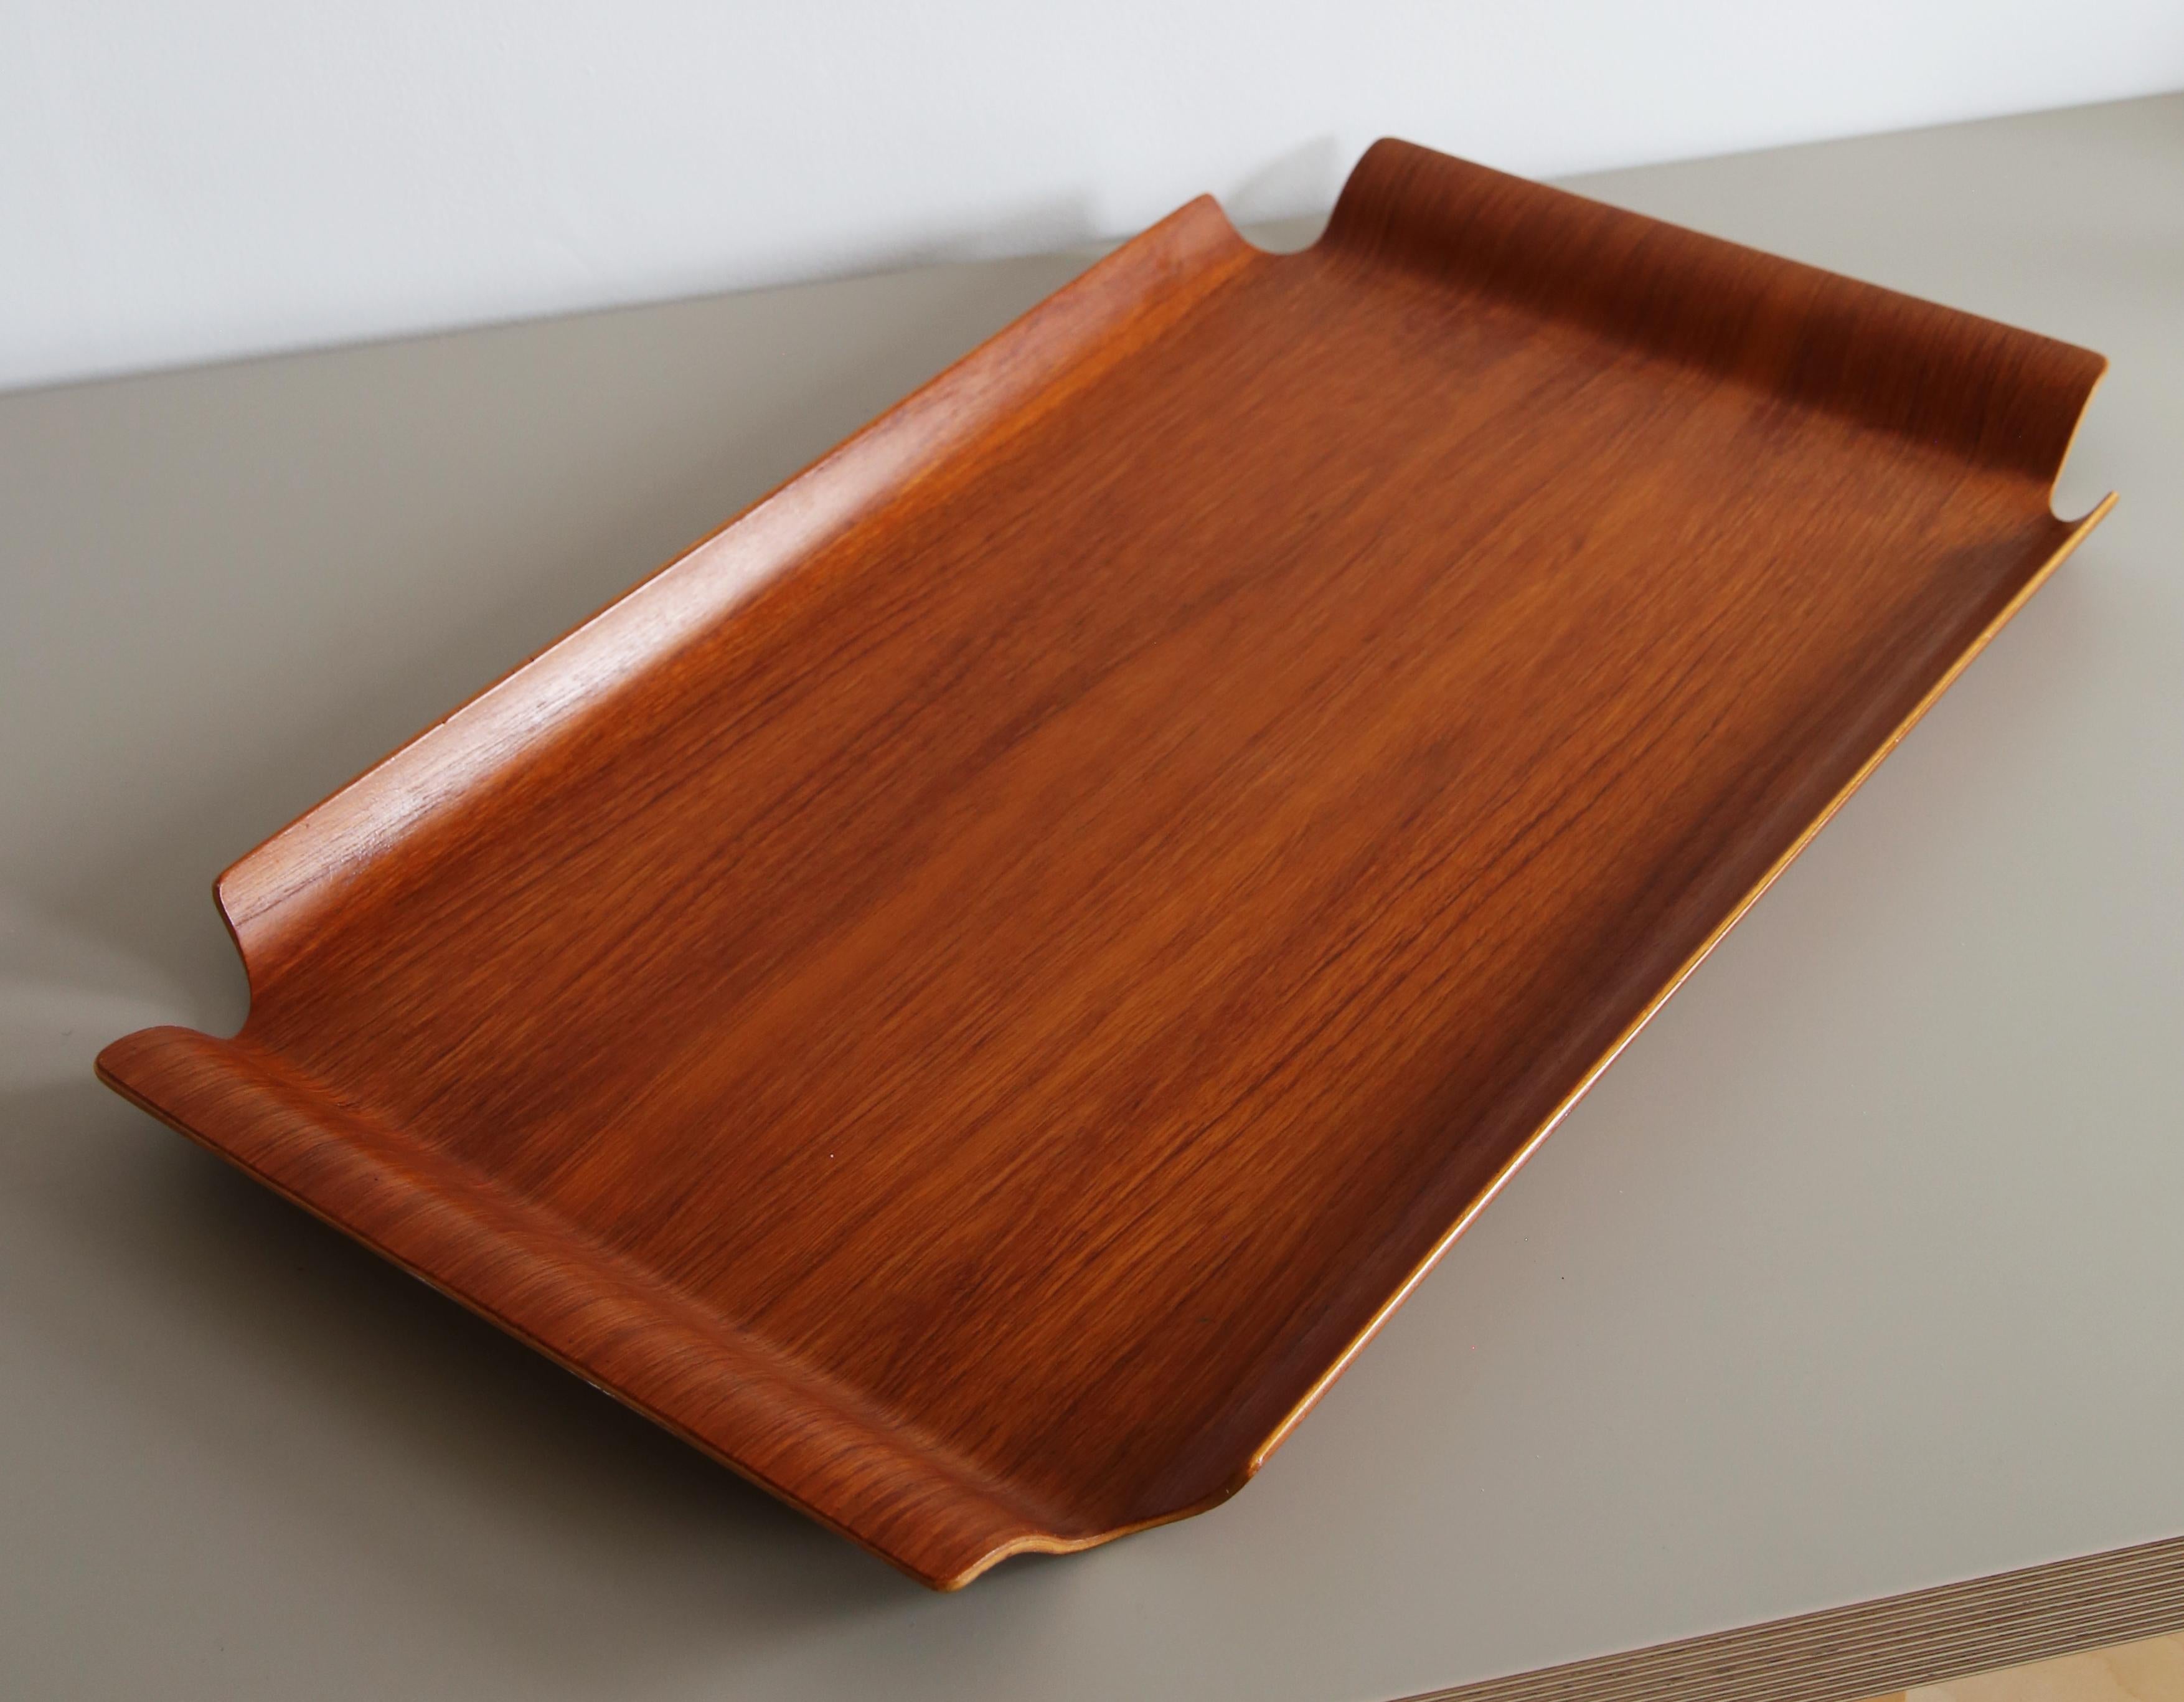 Lovely Mid Century Swedish bentwood teak tray designed by Bertil Fridhagen (Sweden 1905-1993) for Bodafors, dated 1960

Distinctive form with sloping handle borders on all sides with cut-out corners, made from a single sheet with gentle curved up